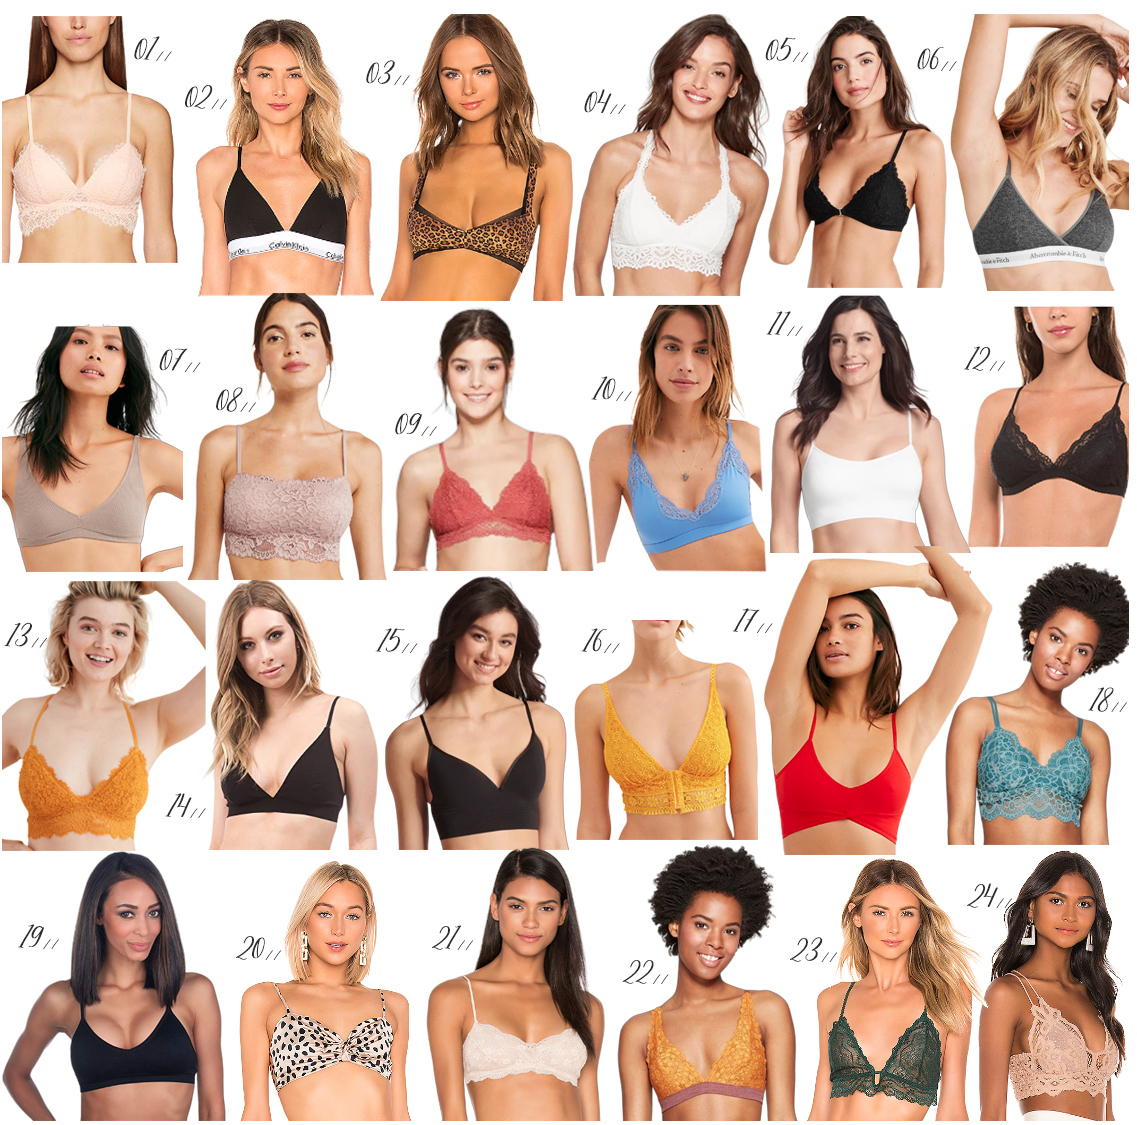 How To Wear Bralette  8 Best Bralette Outfits For An Everyday Look -  Trendsenstylez